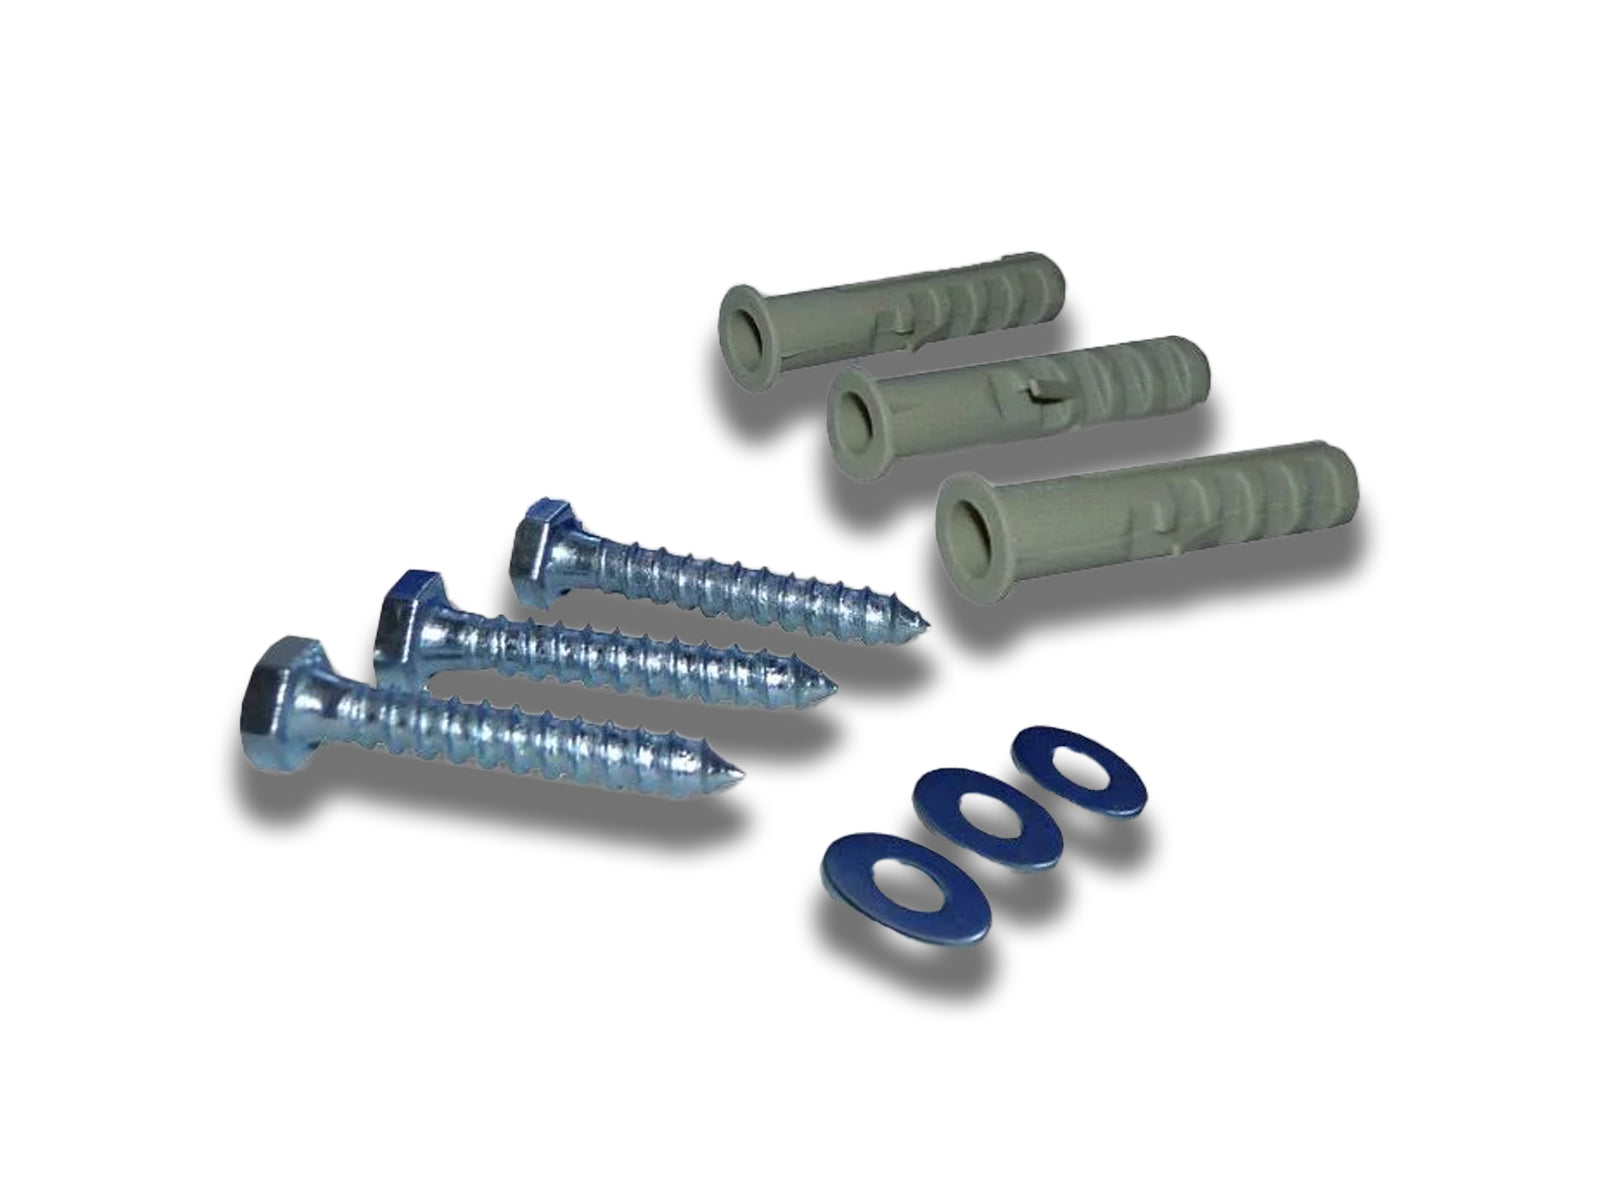 Image-of-the-three-each-of-screws-plugs-and-washers-on-the-white-background